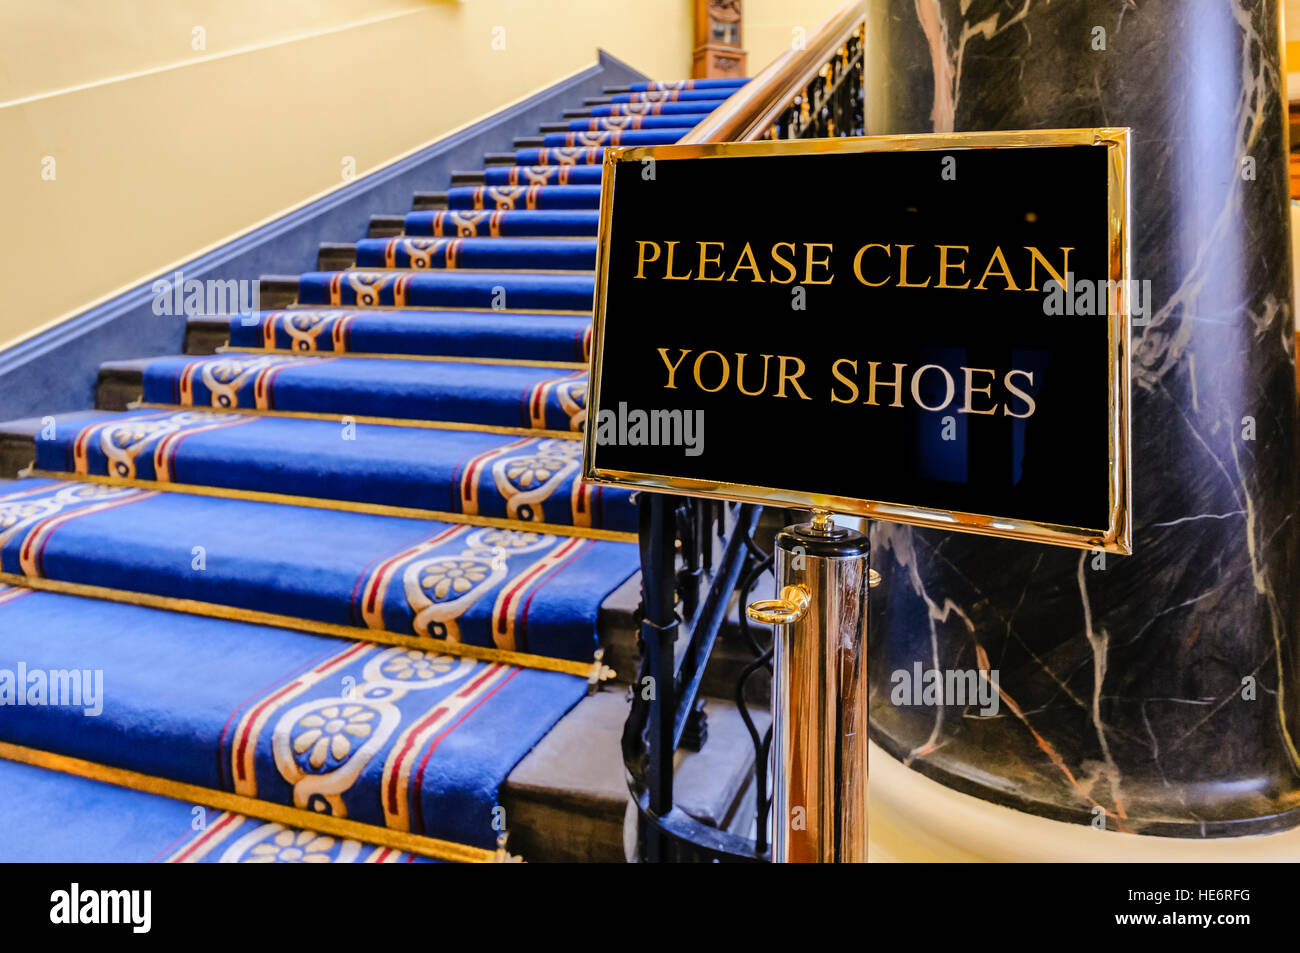 Sign saying 'Please clean your shoes' at the bottom of a flight of stairs in a large, ornate building. Stock Photo